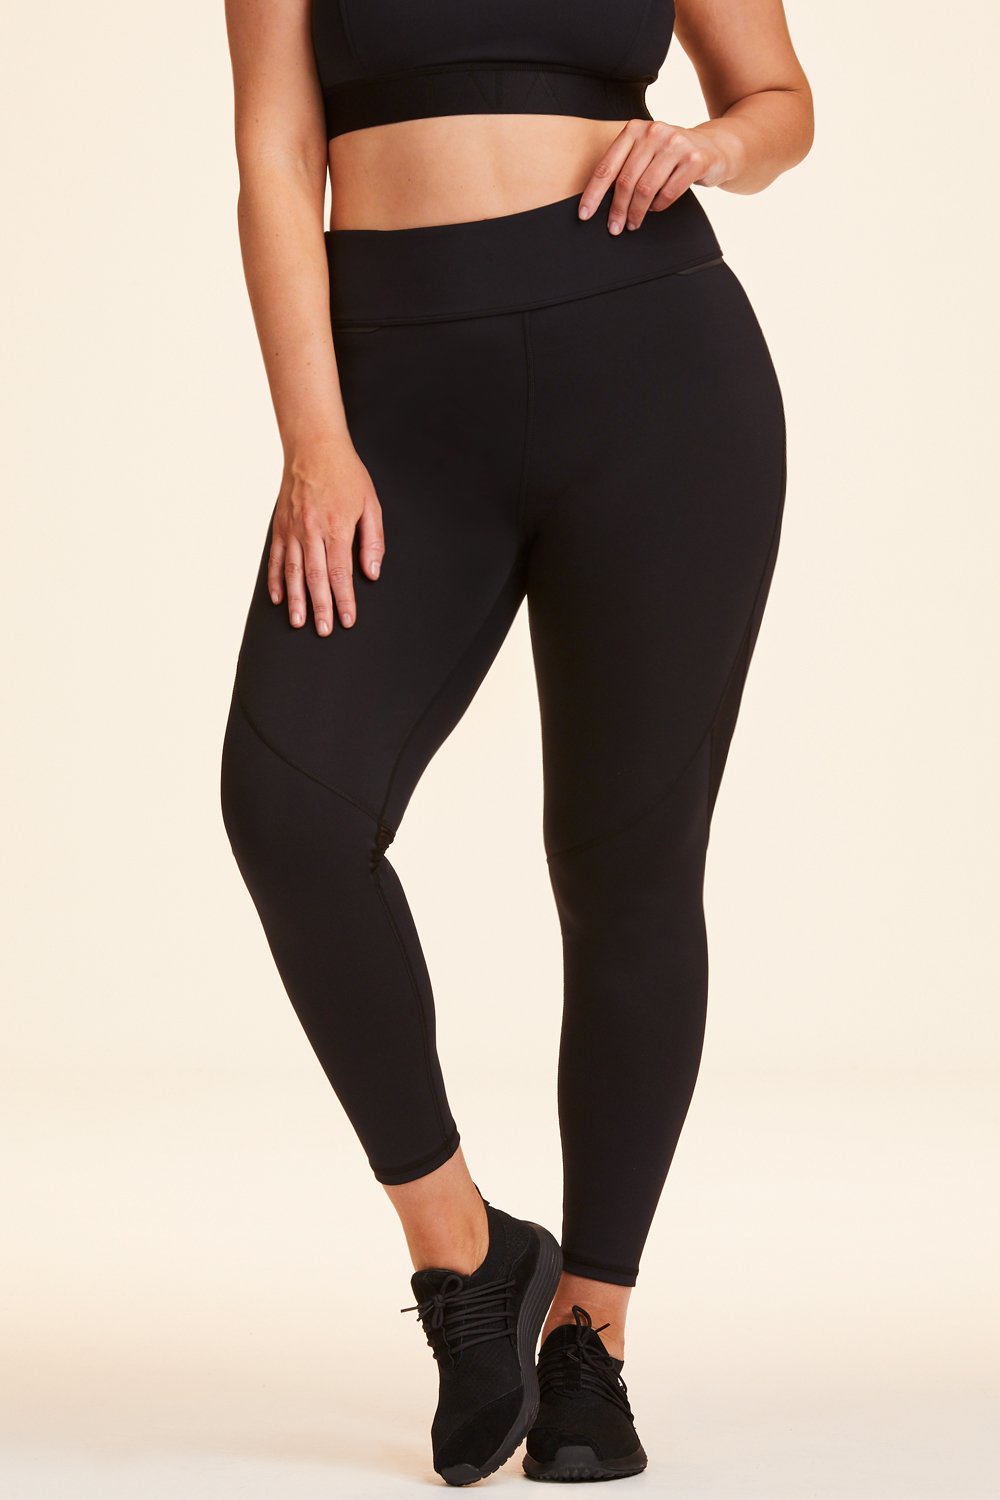 Front view of Alala Women's Luxury Athleisure black tight with mesh paneling on back of knees